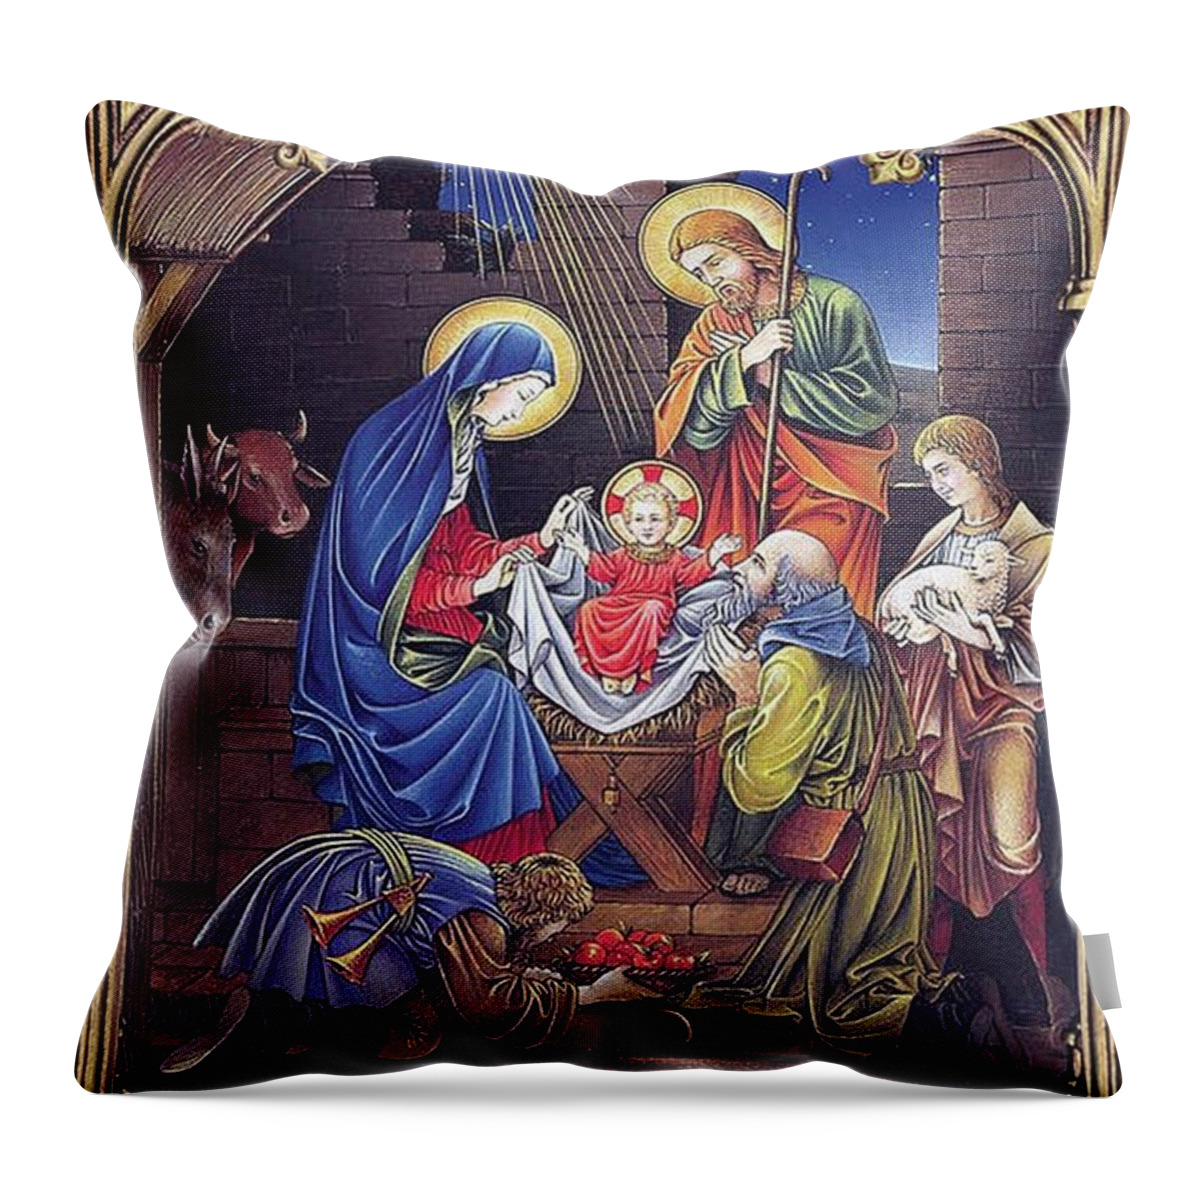 Christmas Throw Pillow featuring the painting Nativity by Artist Unknown